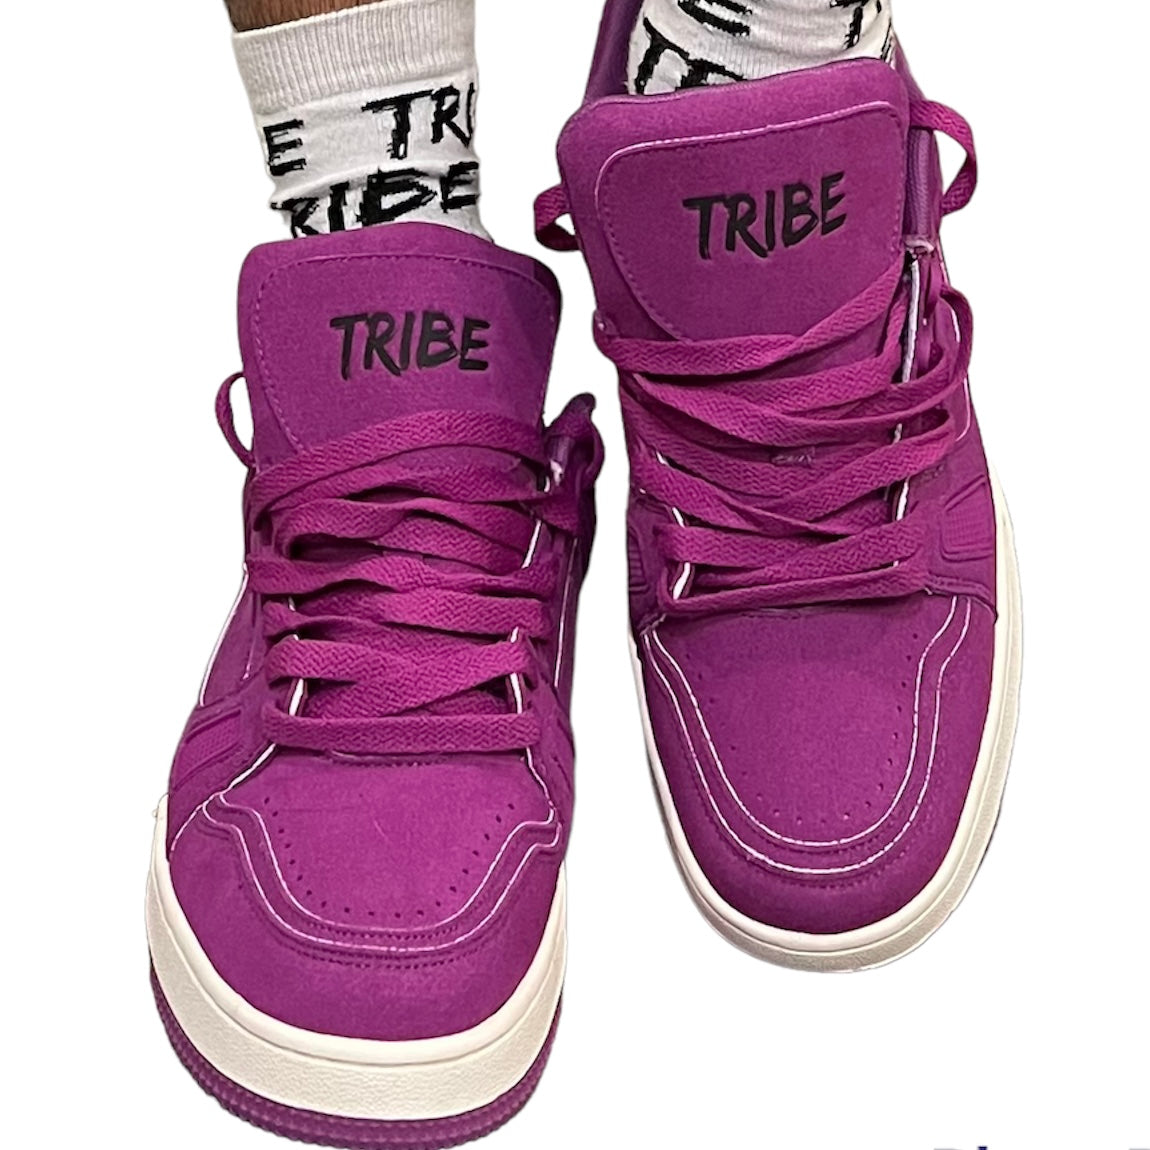 TRIBE TRAINER PG